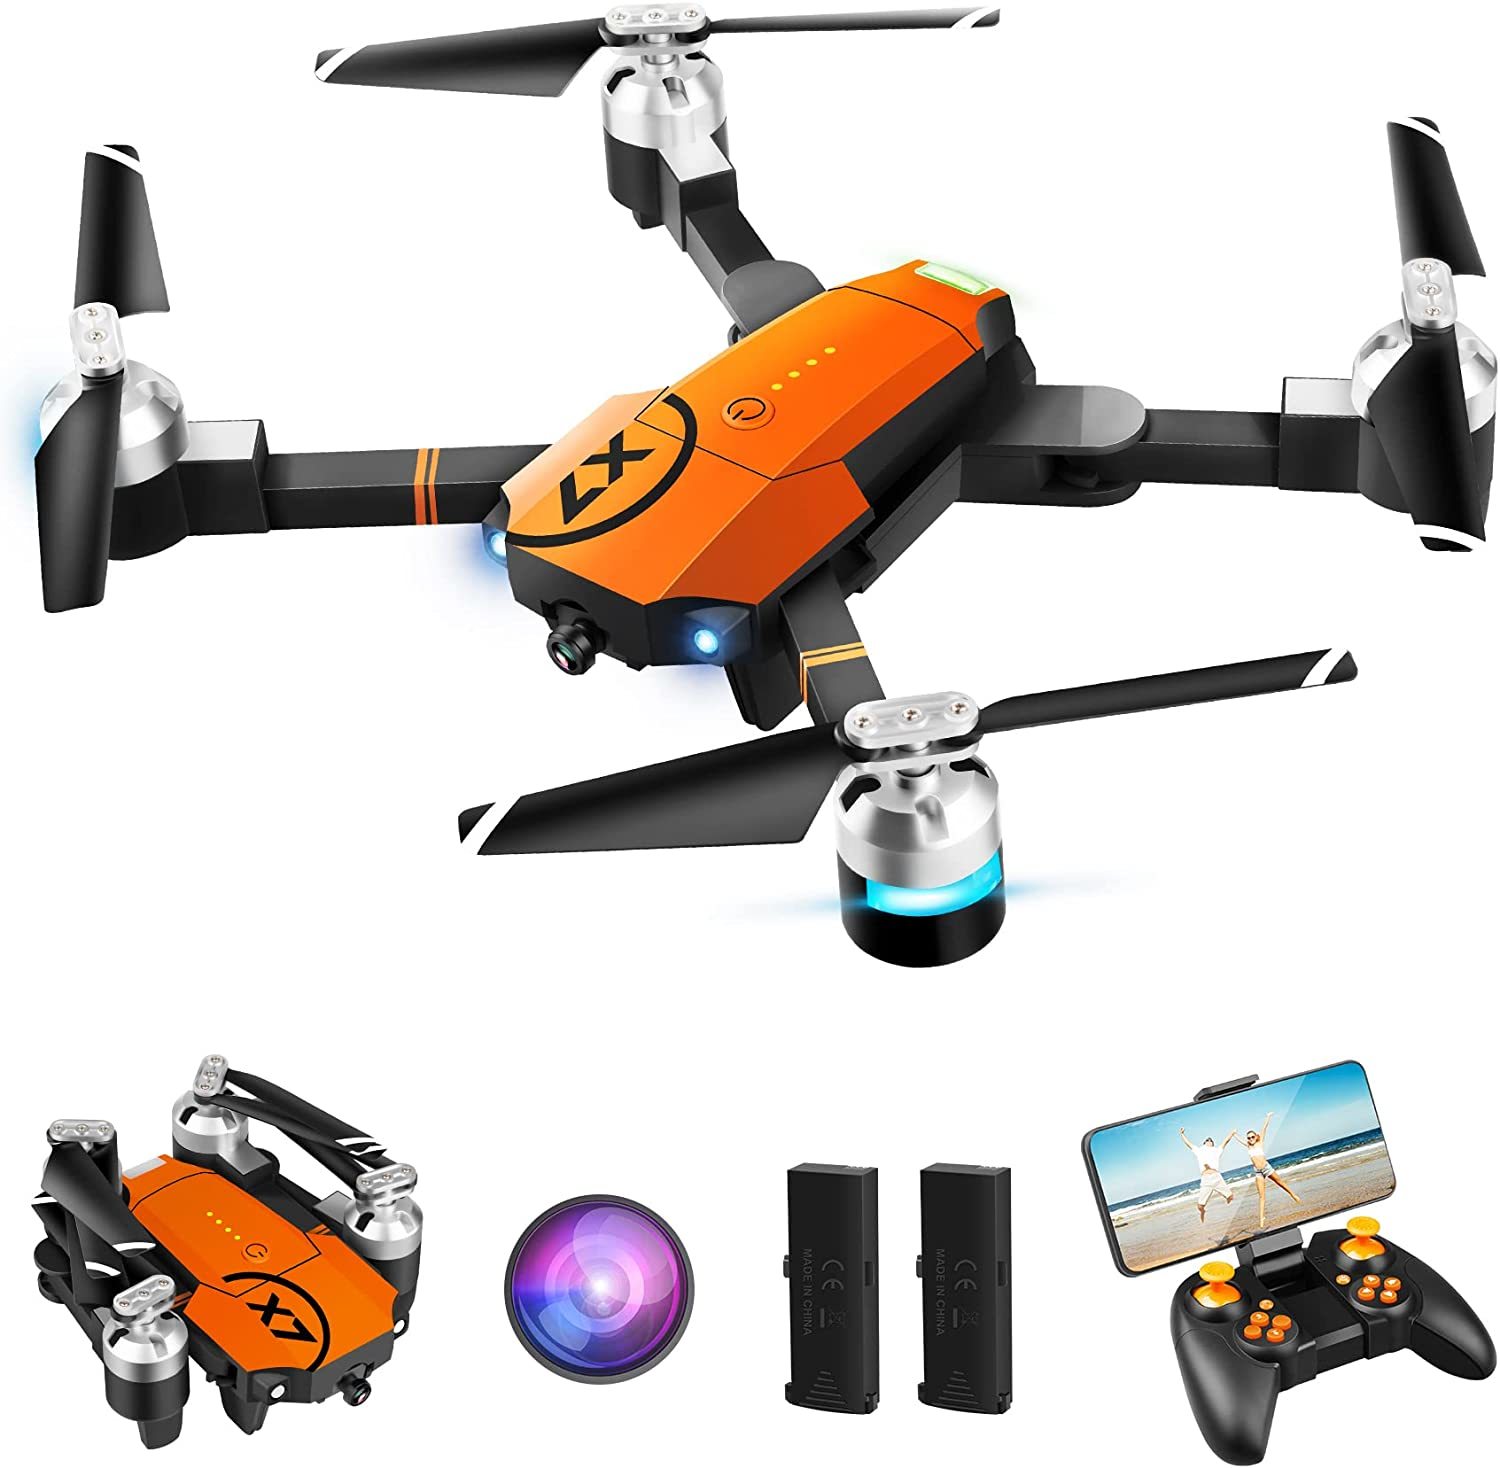 Drone with Camera for Adults, WiFi 1080P HD Camera FPV Live Video, RC Quadcopter - $77.99